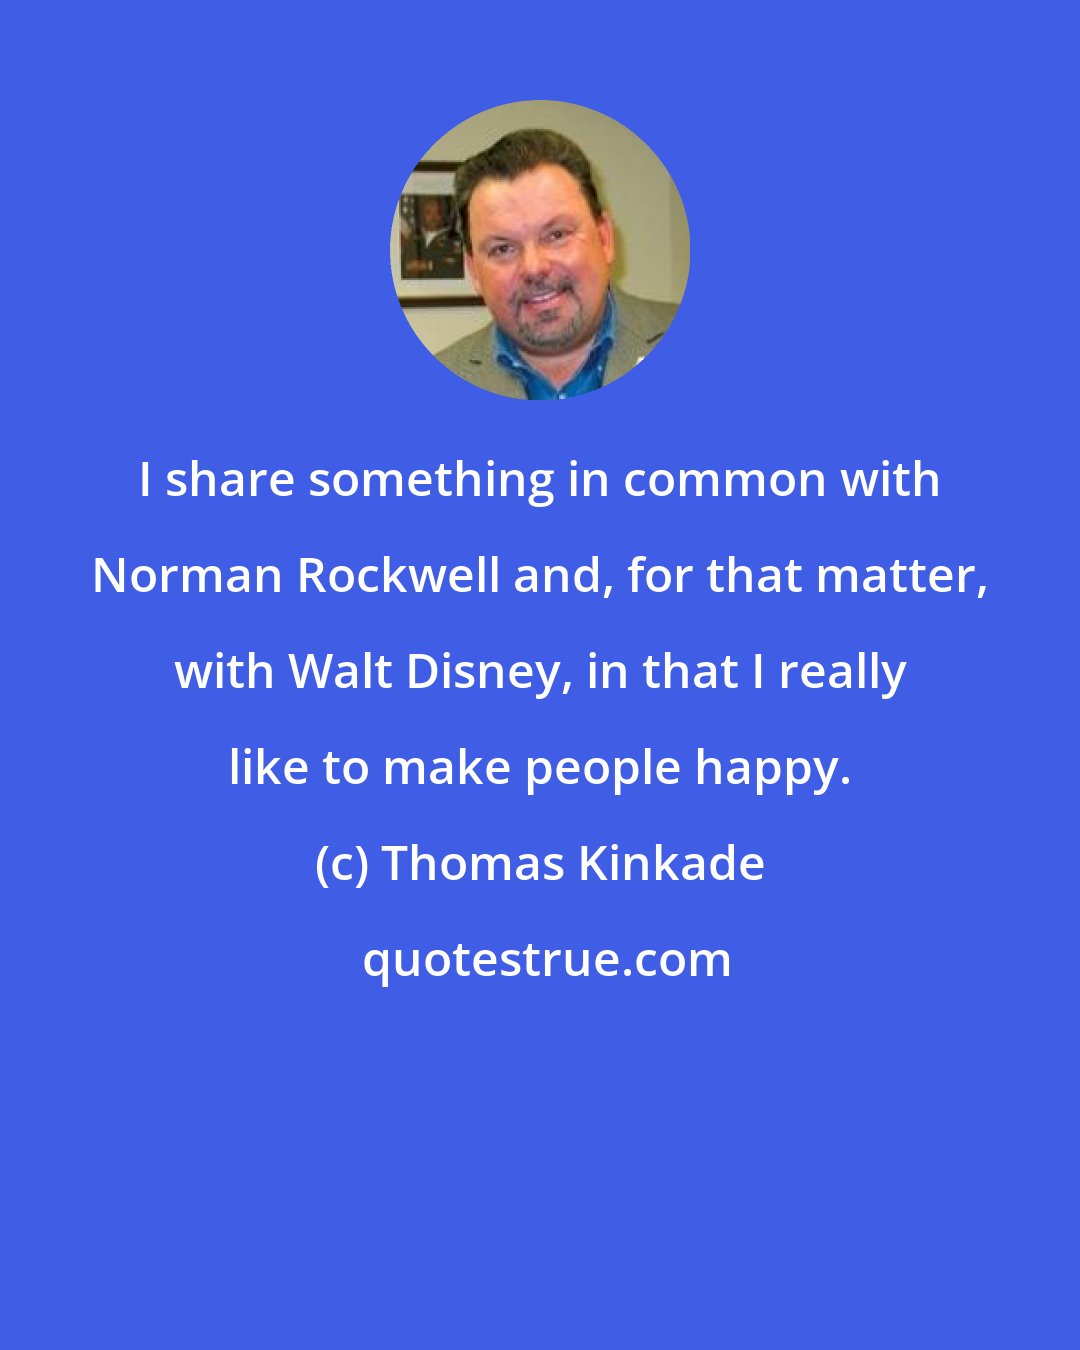 Thomas Kinkade: I share something in common with Norman Rockwell and, for that matter, with Walt Disney, in that I really like to make people happy.